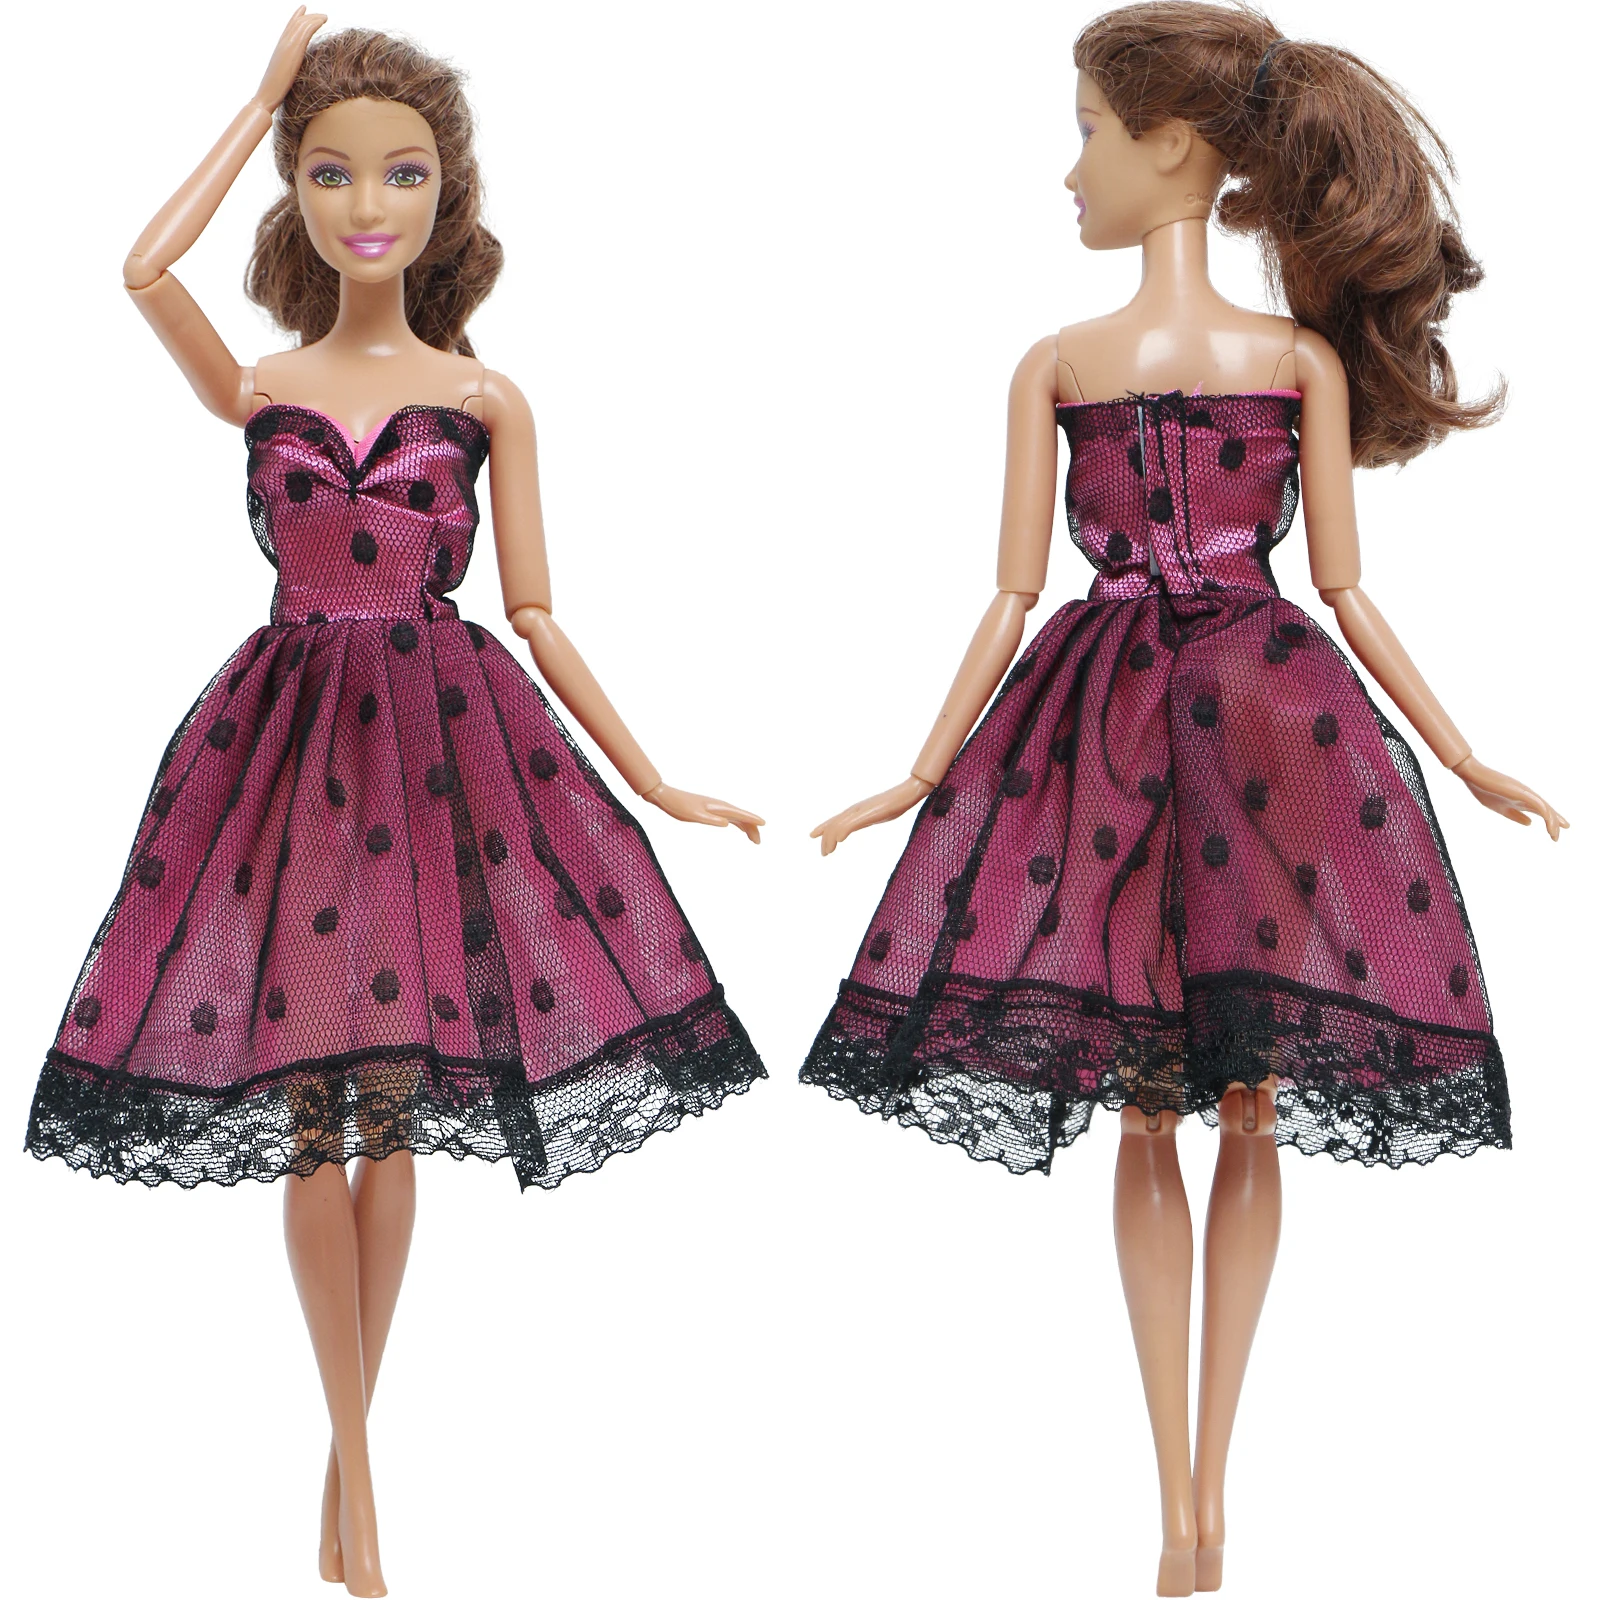 BJDBUS 1 Set Fashion Red Dress Wedding Party Gown Lace Wave Point Skirt Casual Wear Princess Clothes for Barbie Doll Toys